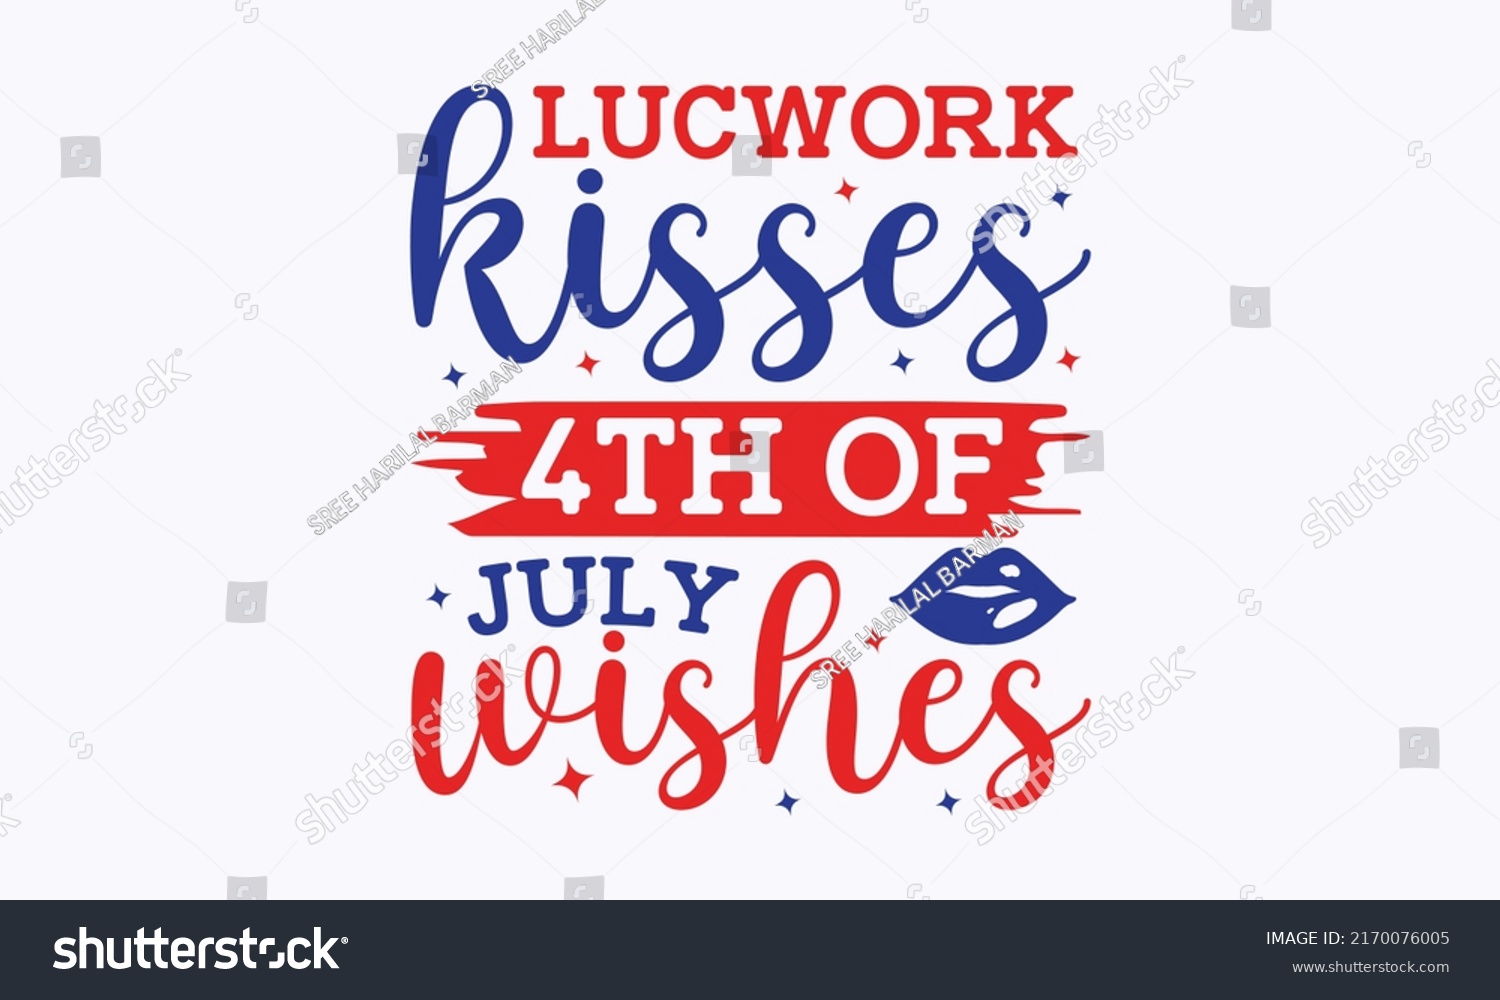 SVG of lucwork kisses 4th of july wishes -  4th of July fireworks svg for design shirt and scrapbooking. Good for advertising, poster, announcement, invitation, Templet svg